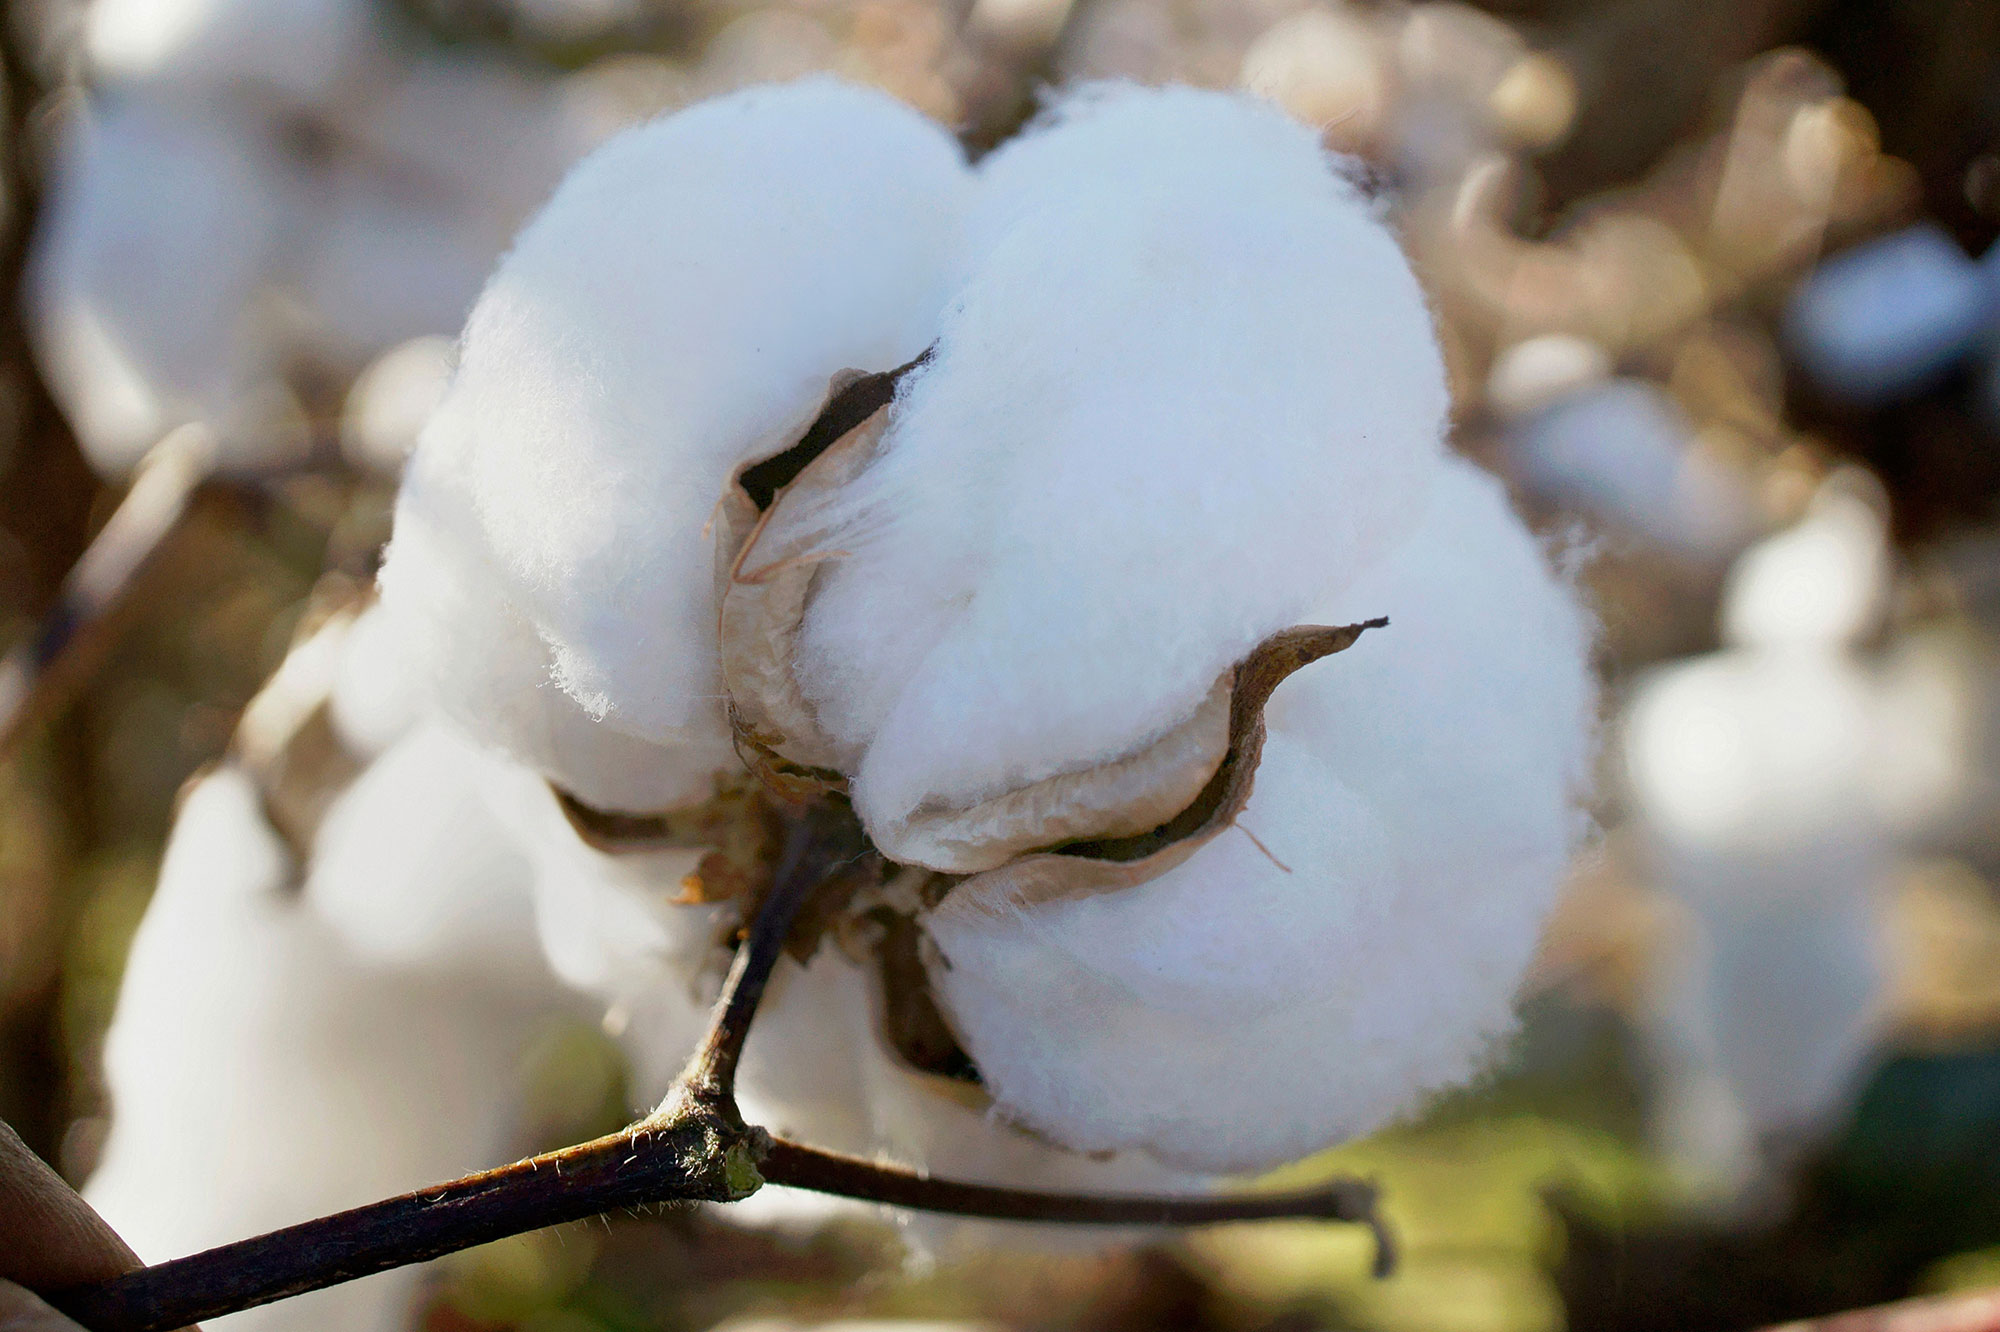 Pima cotton could help Texas farmers in dry conditions - AGDAILY